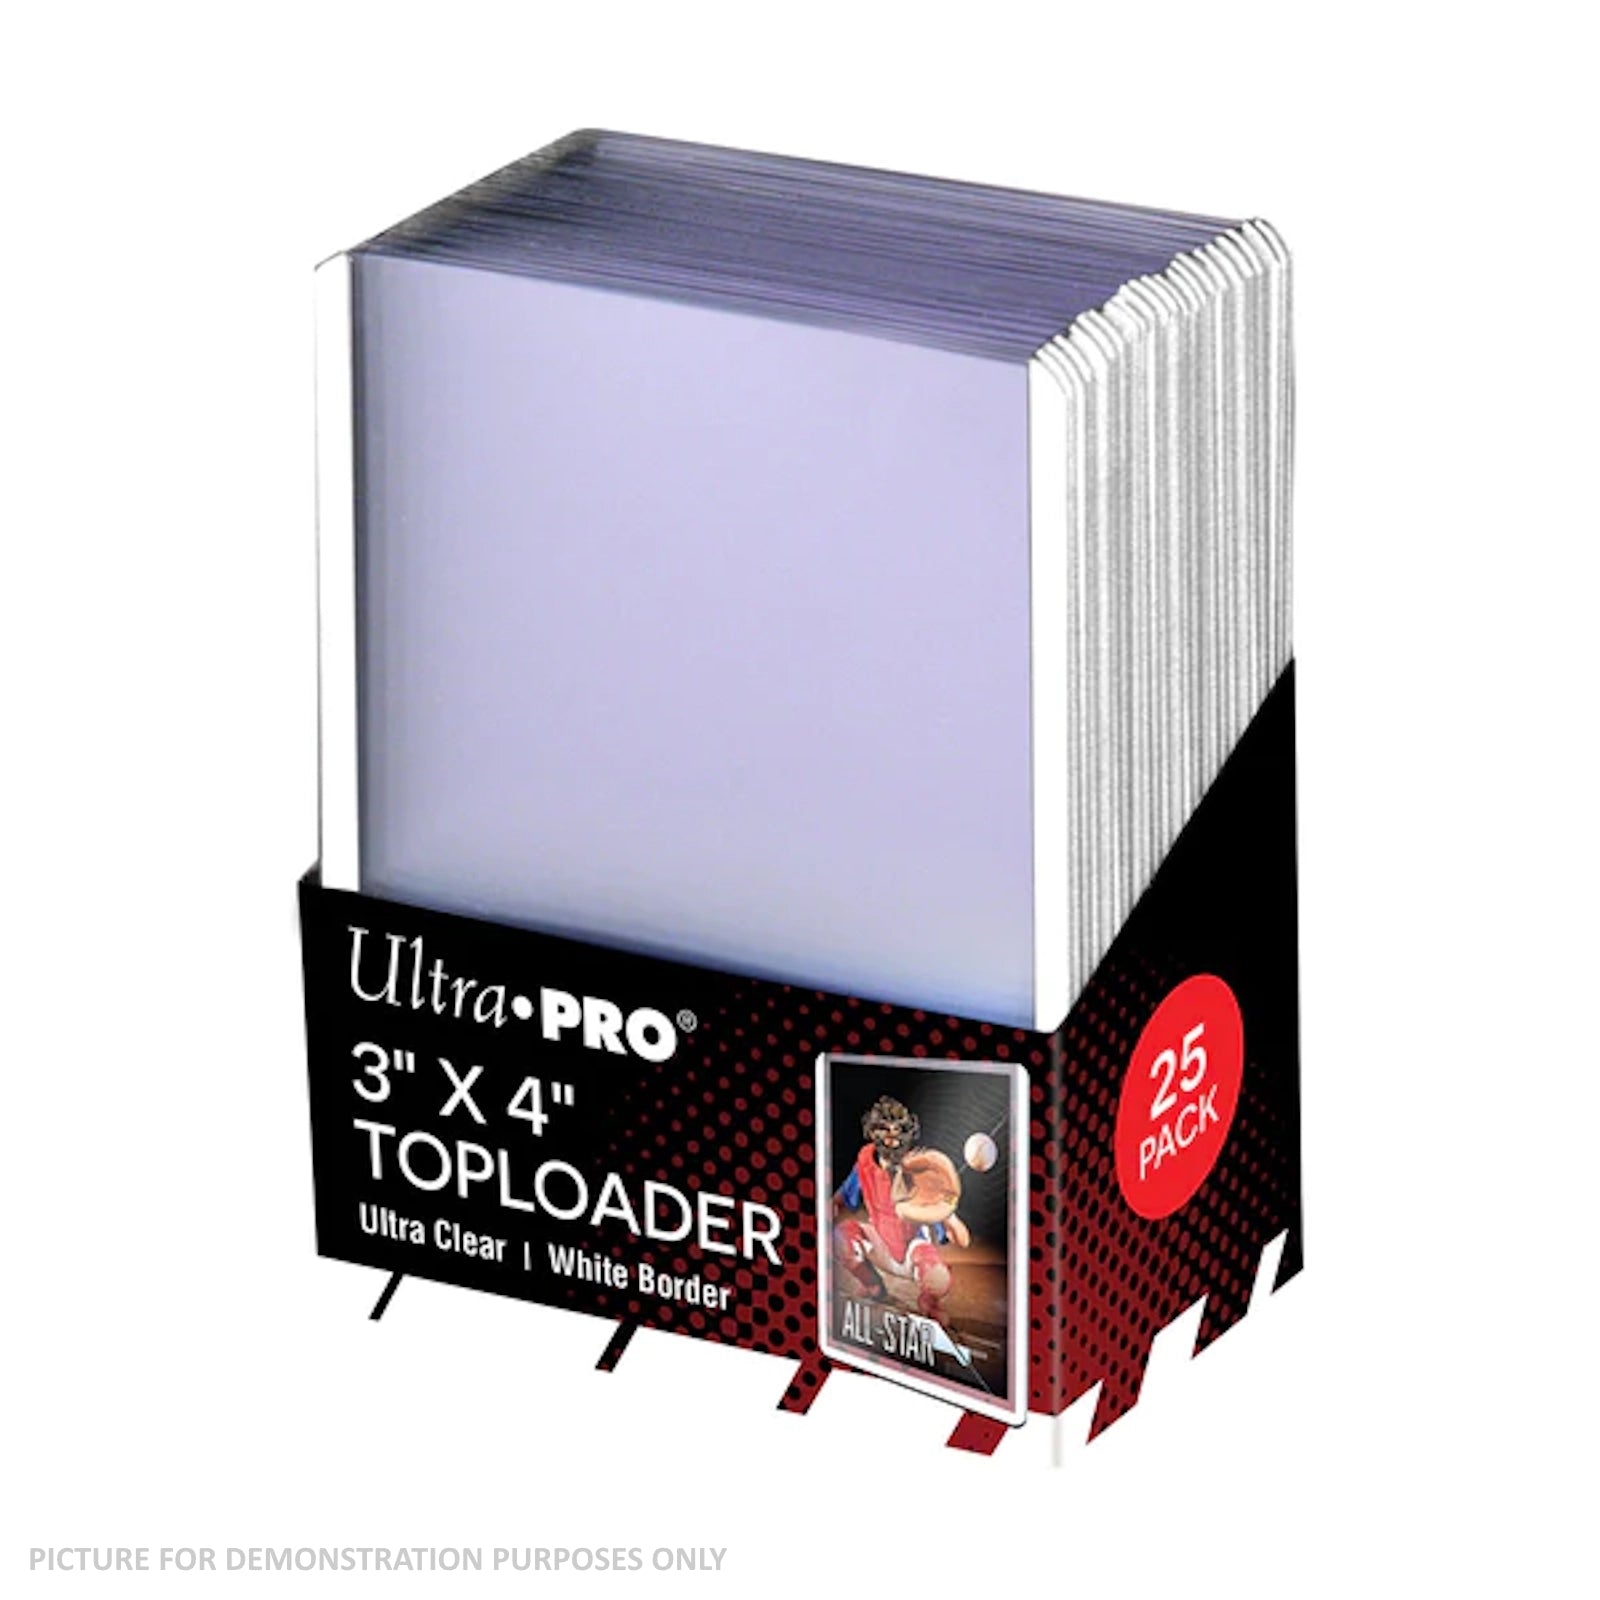 Ultra Pro WHITE Border Toploaders 3" X 4" - PACK OF 25